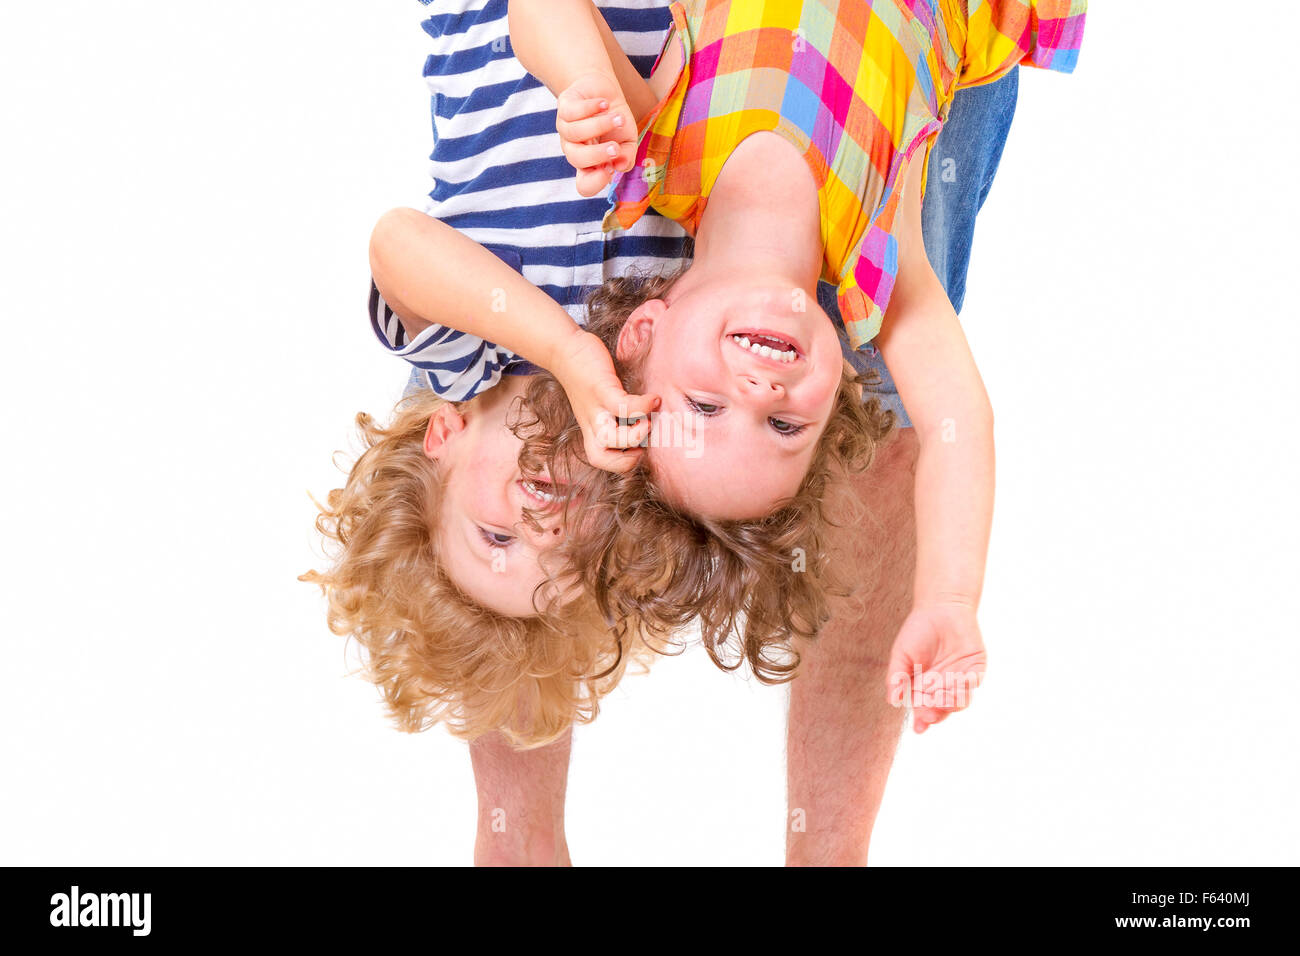 Father hands holding his smiling and playful children upside down on white background. Stock Photo